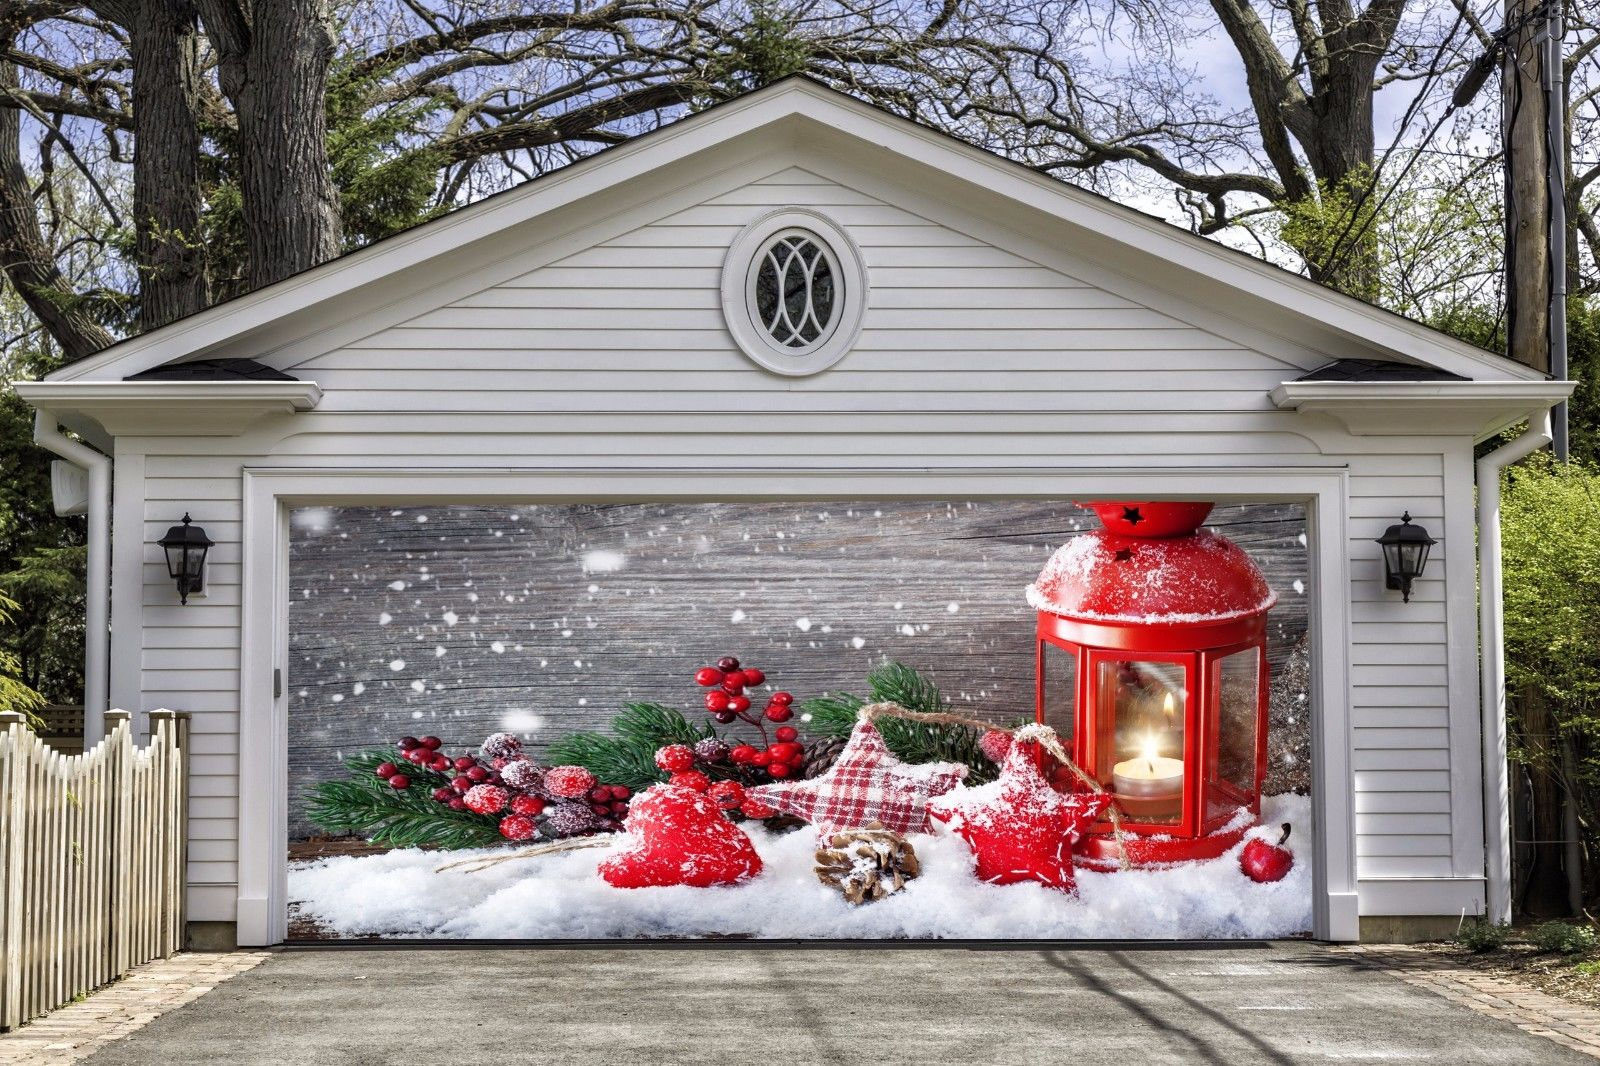 Decorated Garage Doors
 Christmas Decor for Garage Door Christmas Garage Door